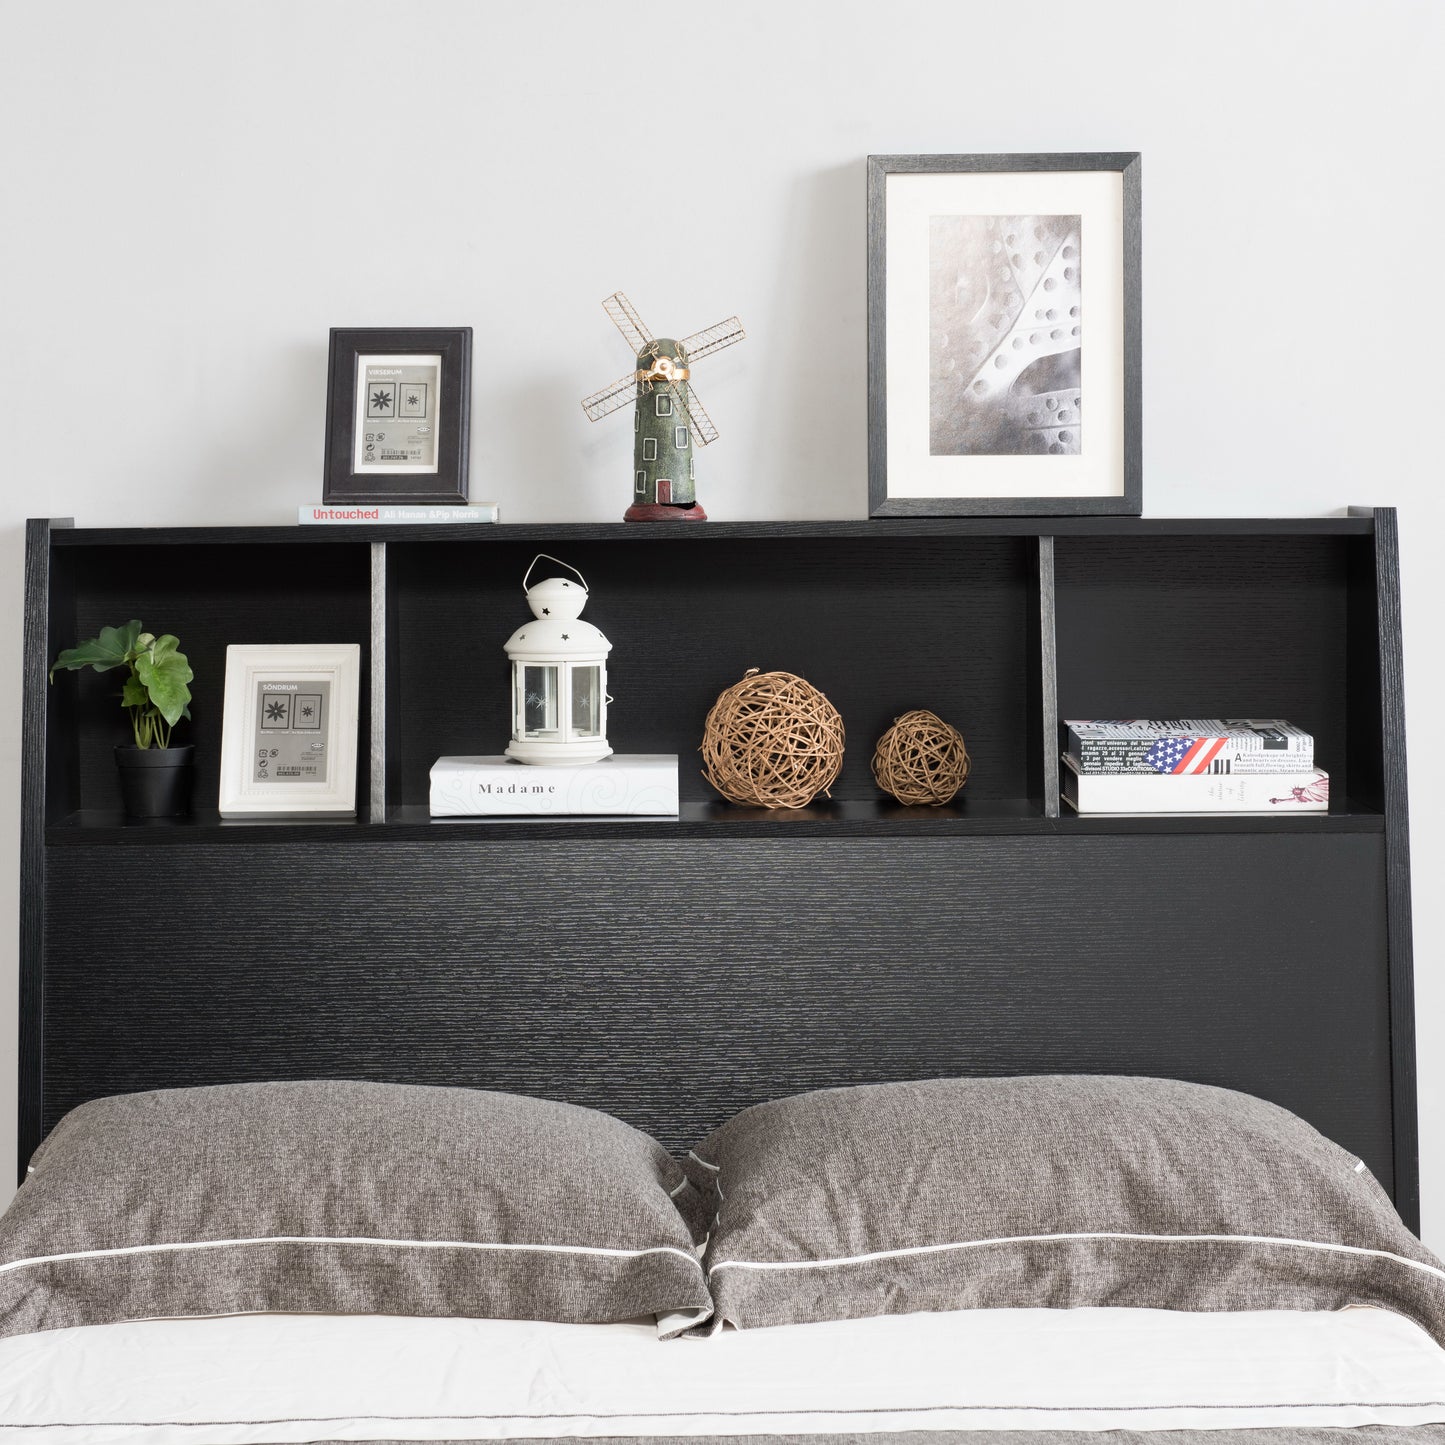 Front-facing headboard detail of a contemporary cappuccino curvy platform storage bed with a bookcase headboard in a bedroom with accessories